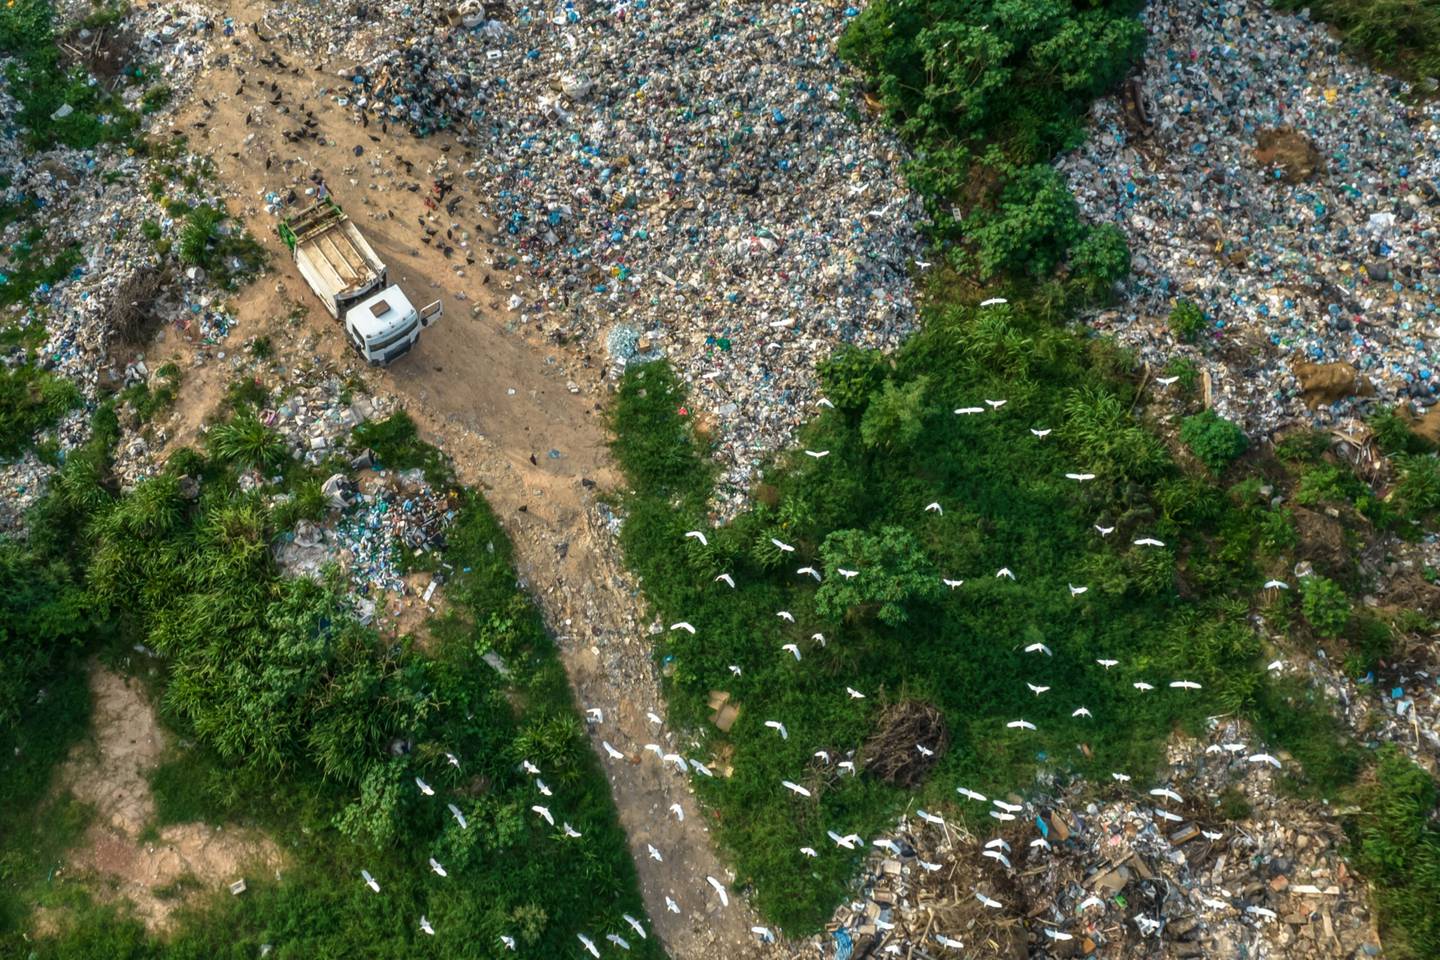 A truck dumps garbage at a landfill in Brazil in the Amazon rainforest.